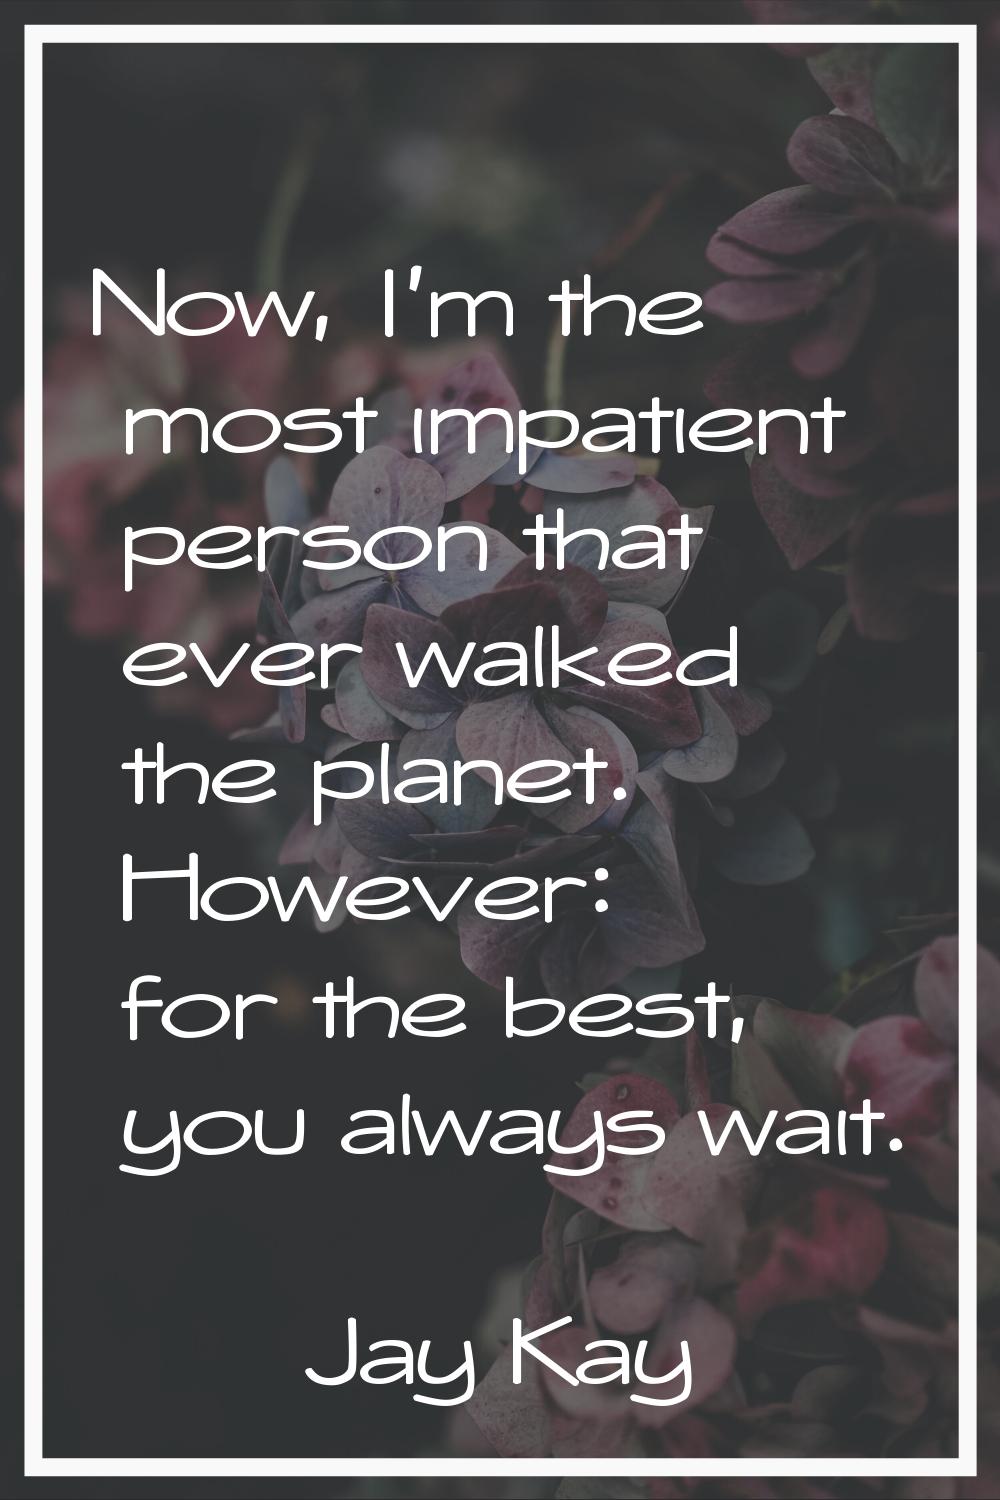 Now, I'm the most impatient person that ever walked the planet. However: for the best, you always w